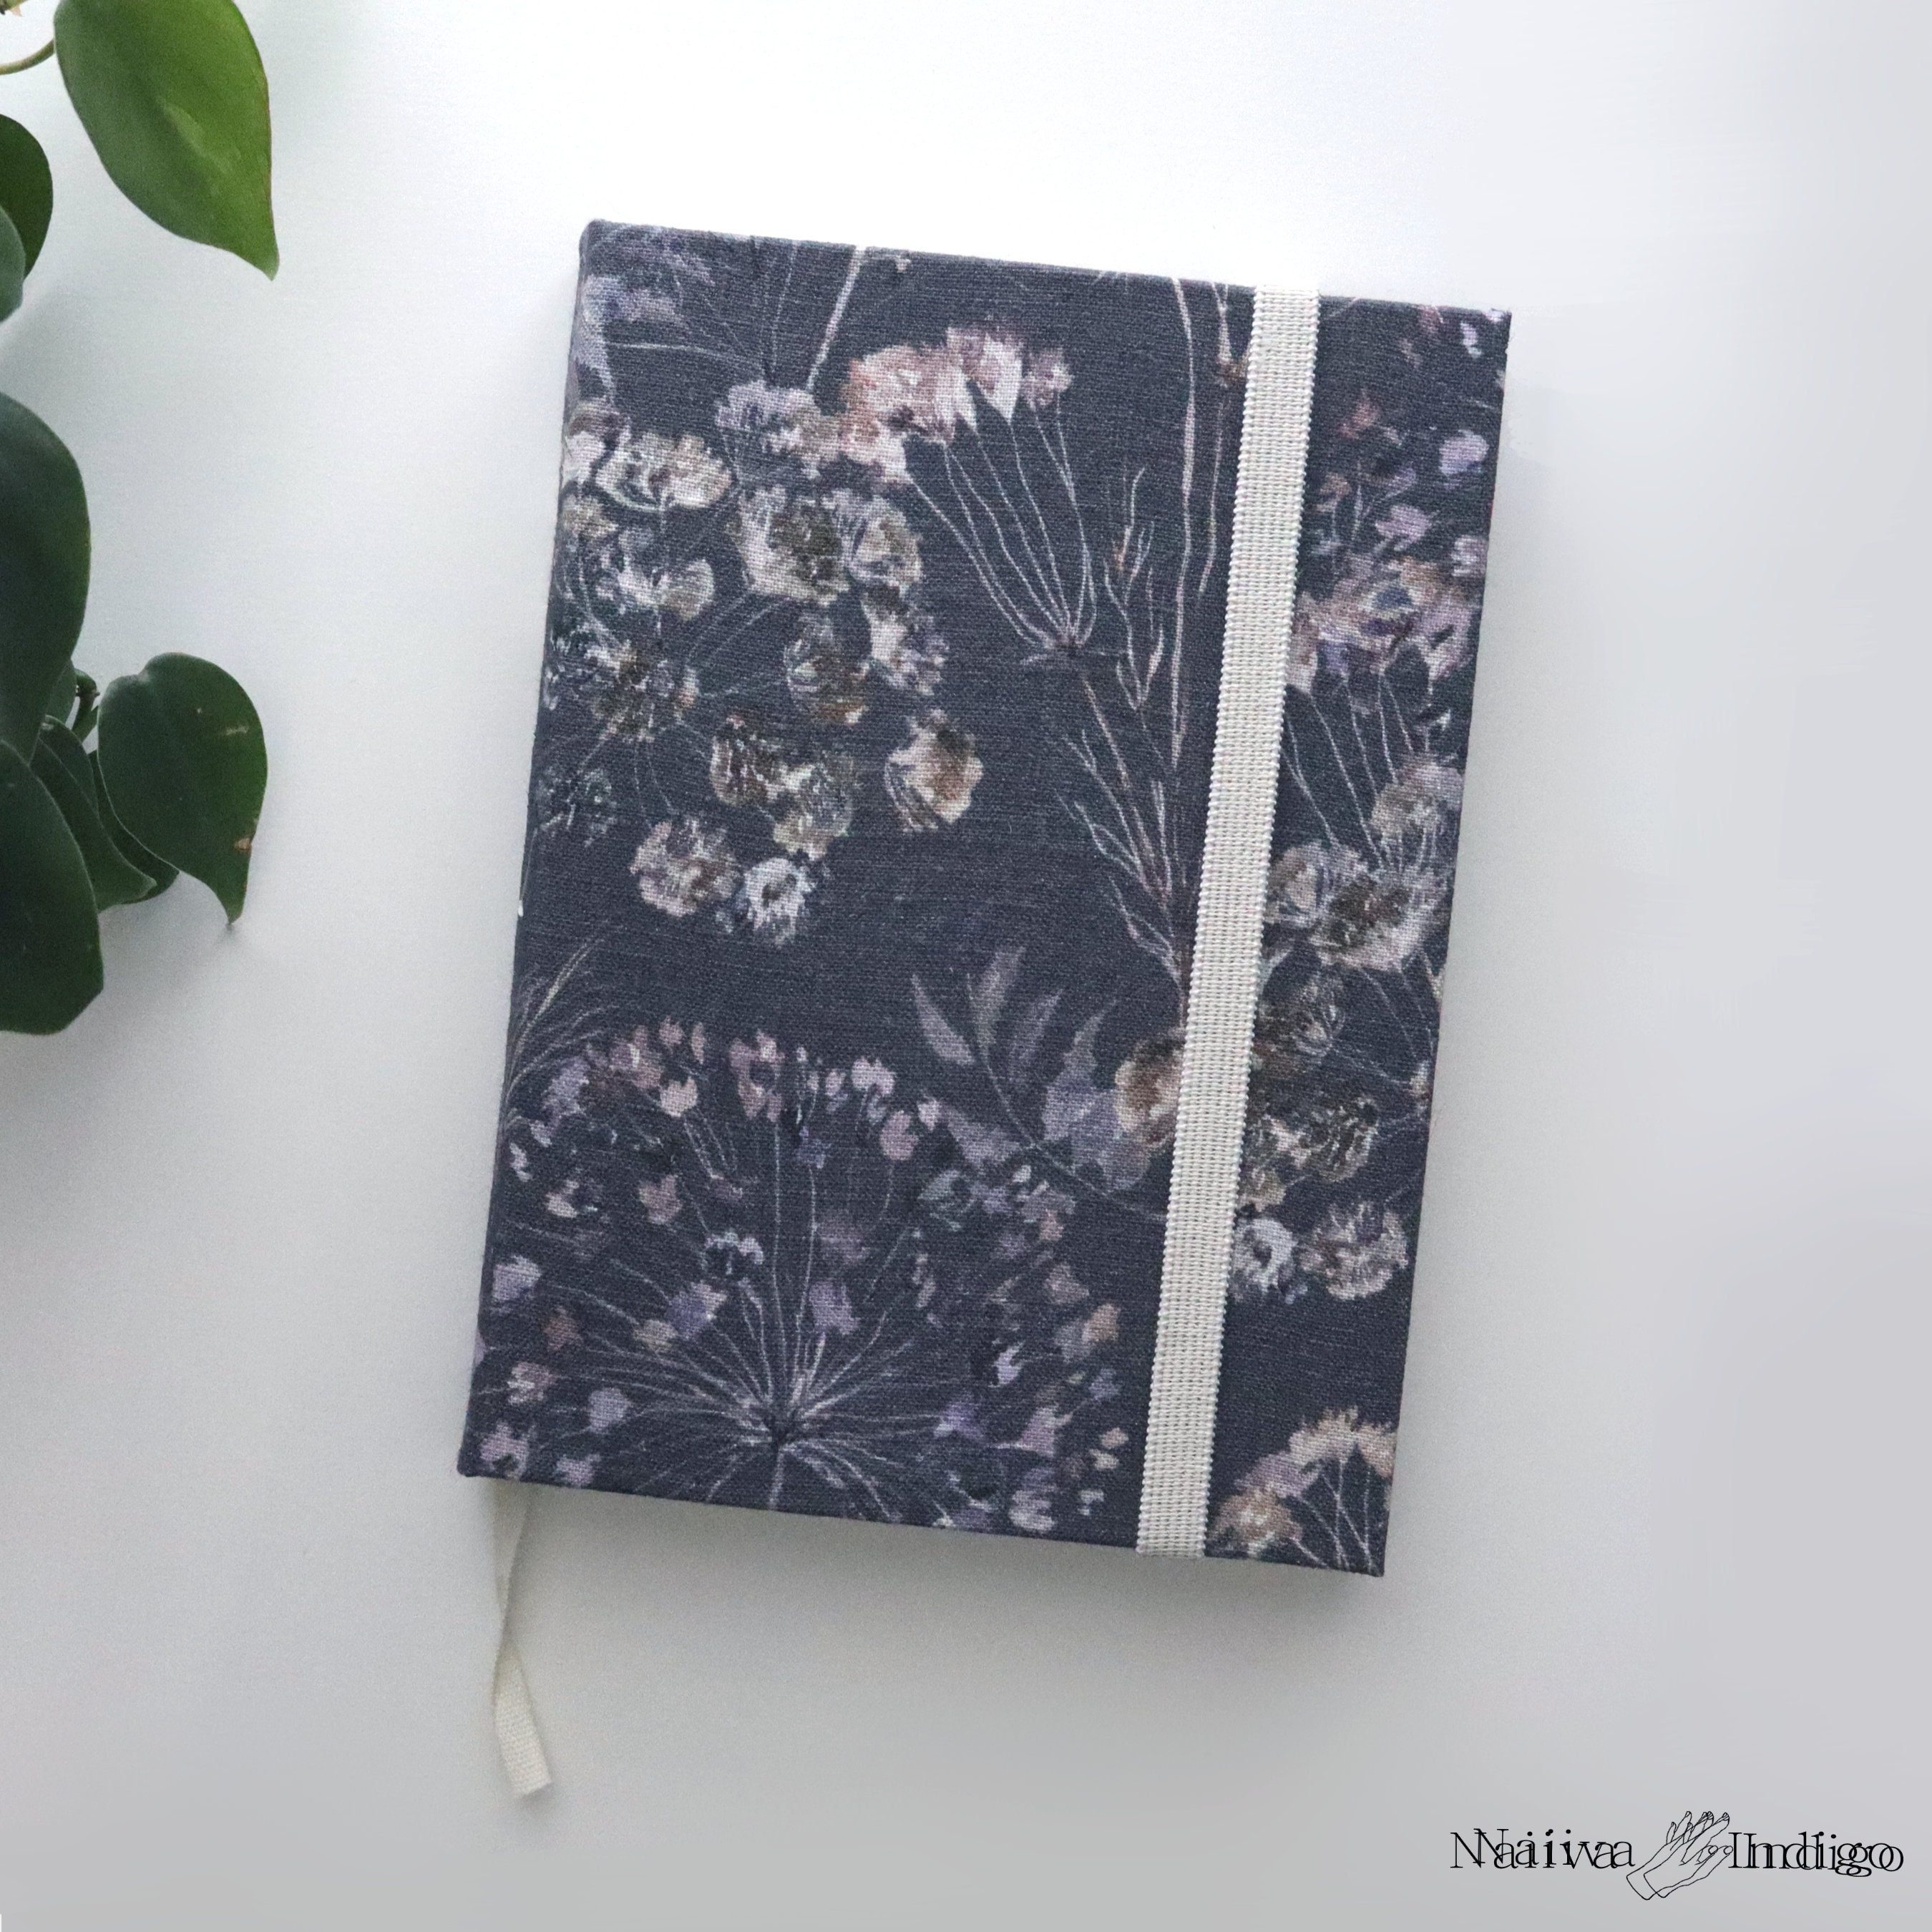 Handmade Sketchbook with Fabriano Artistico 300gsm Watercolour Paper  (28x19cm)